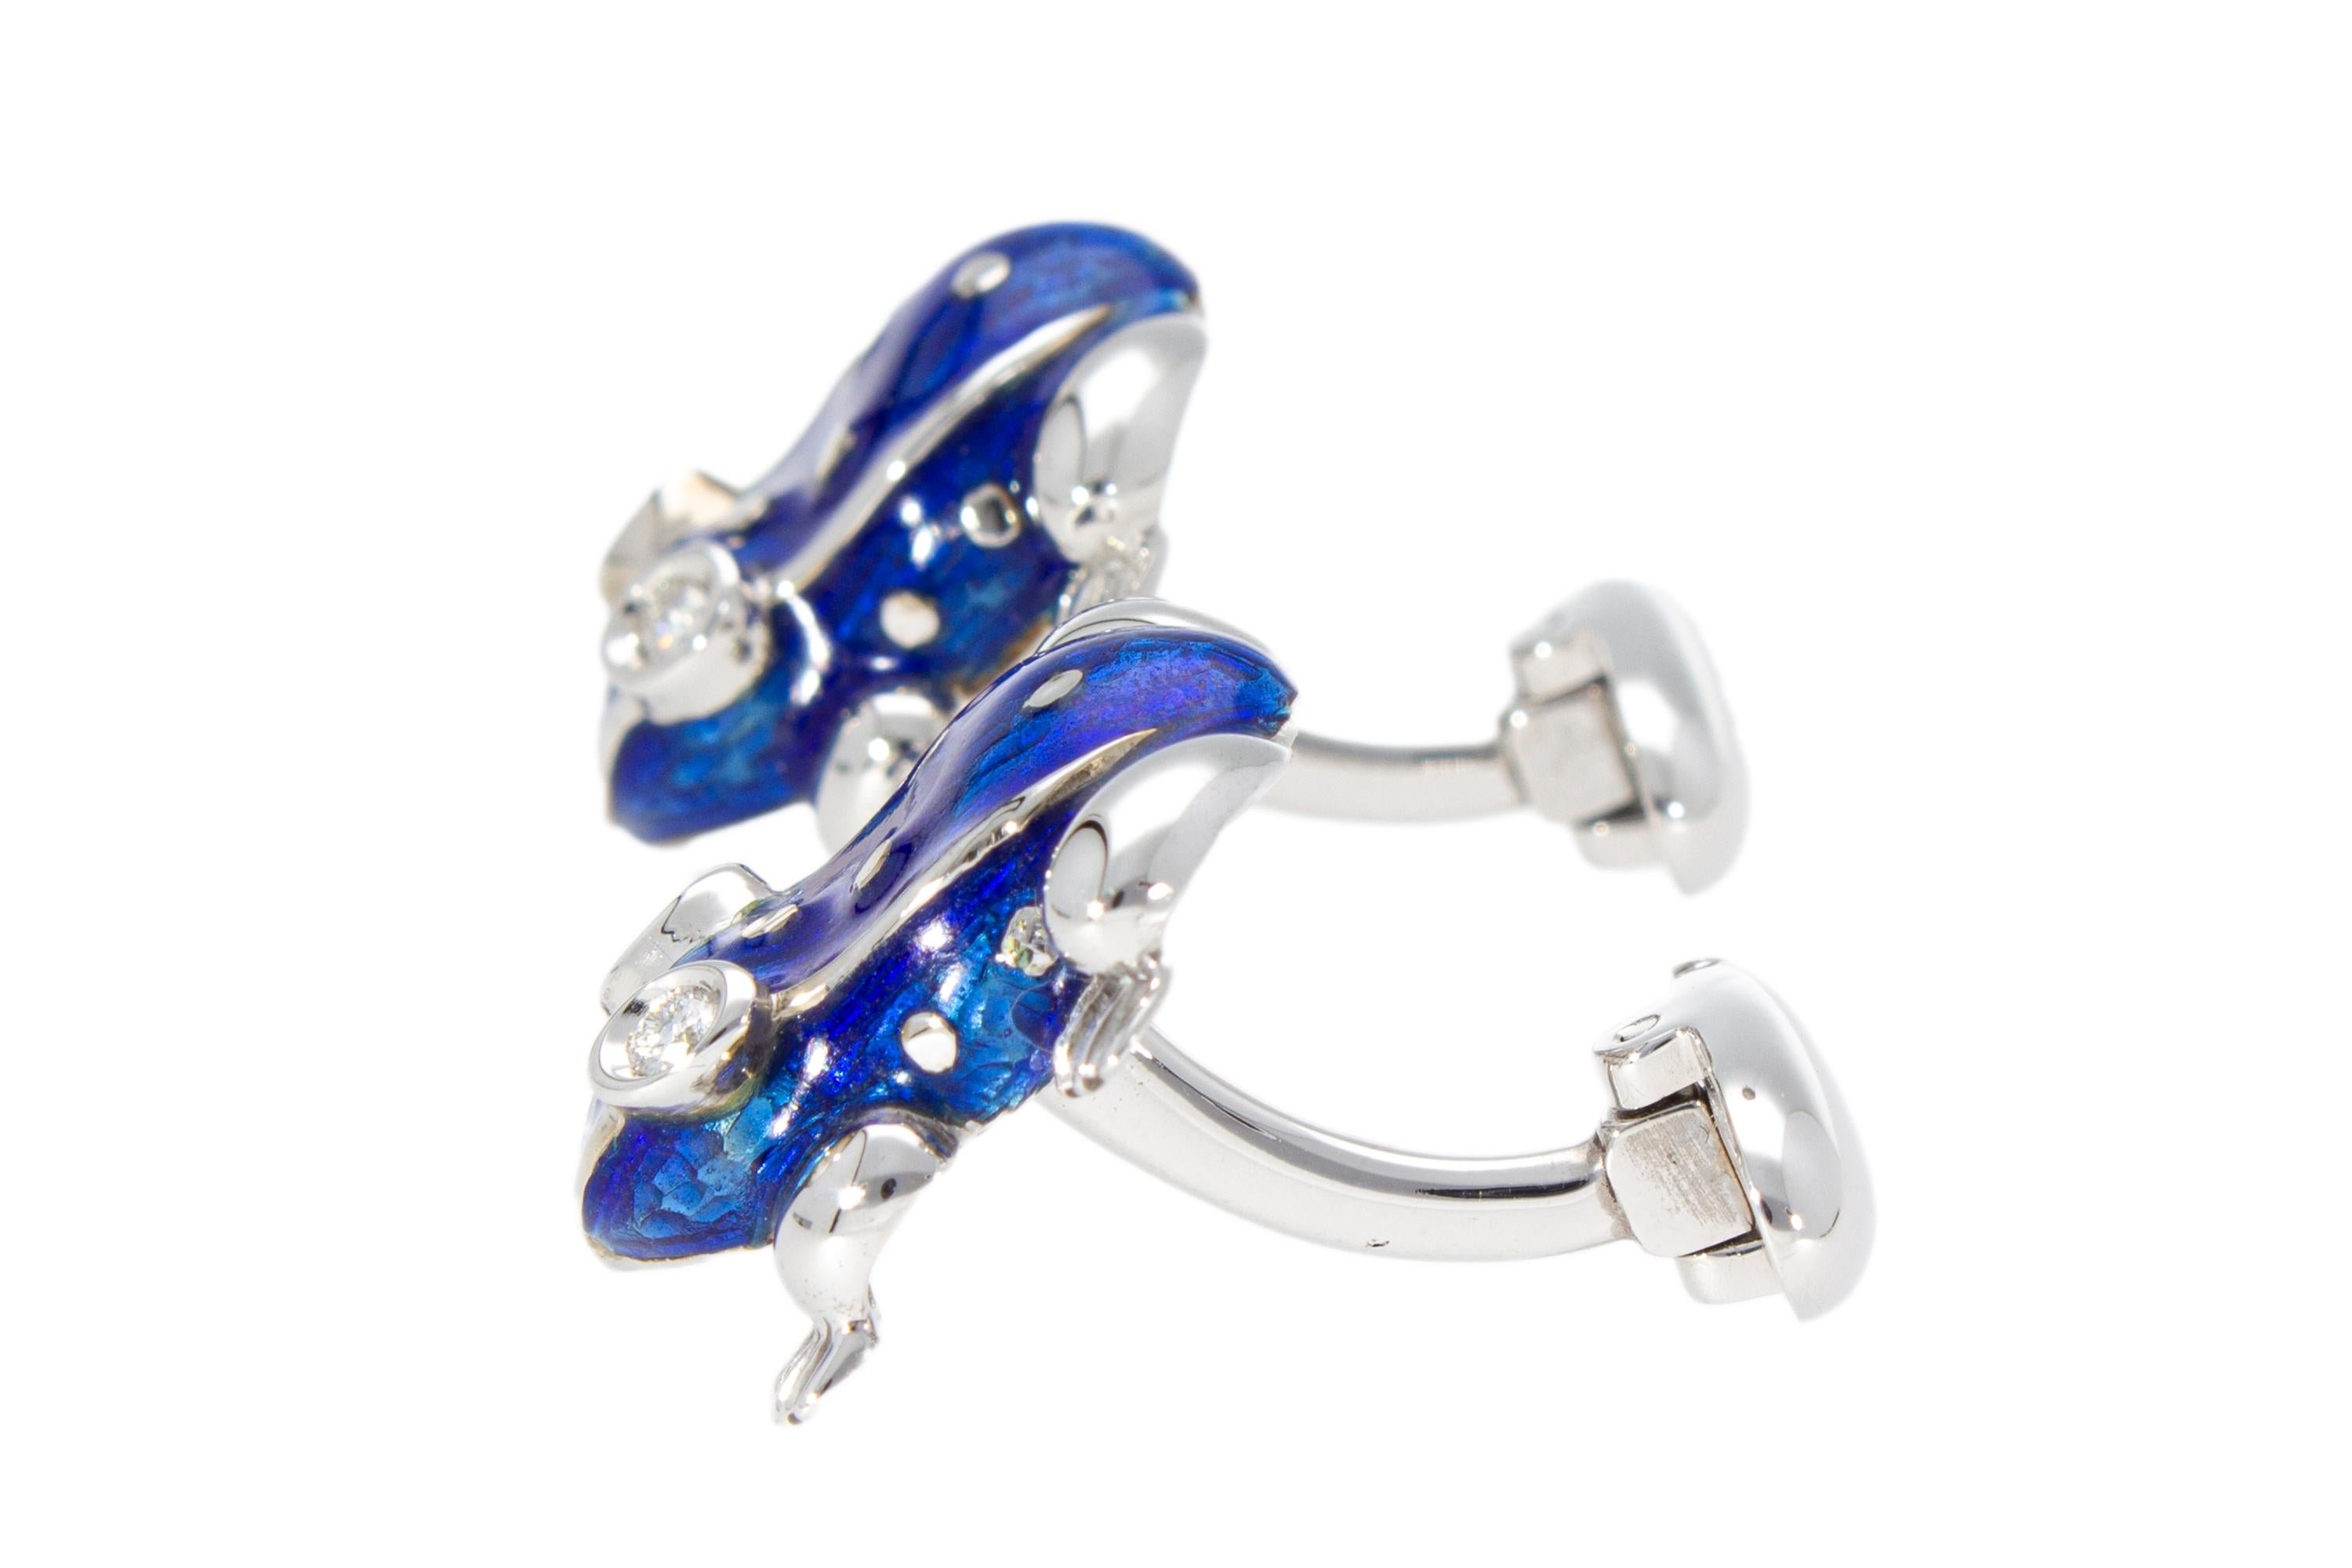 18 Kt White Gold with Blu Enamel Diamonds Frog Cufflinks Handcraft Made in Italy For Sale 2